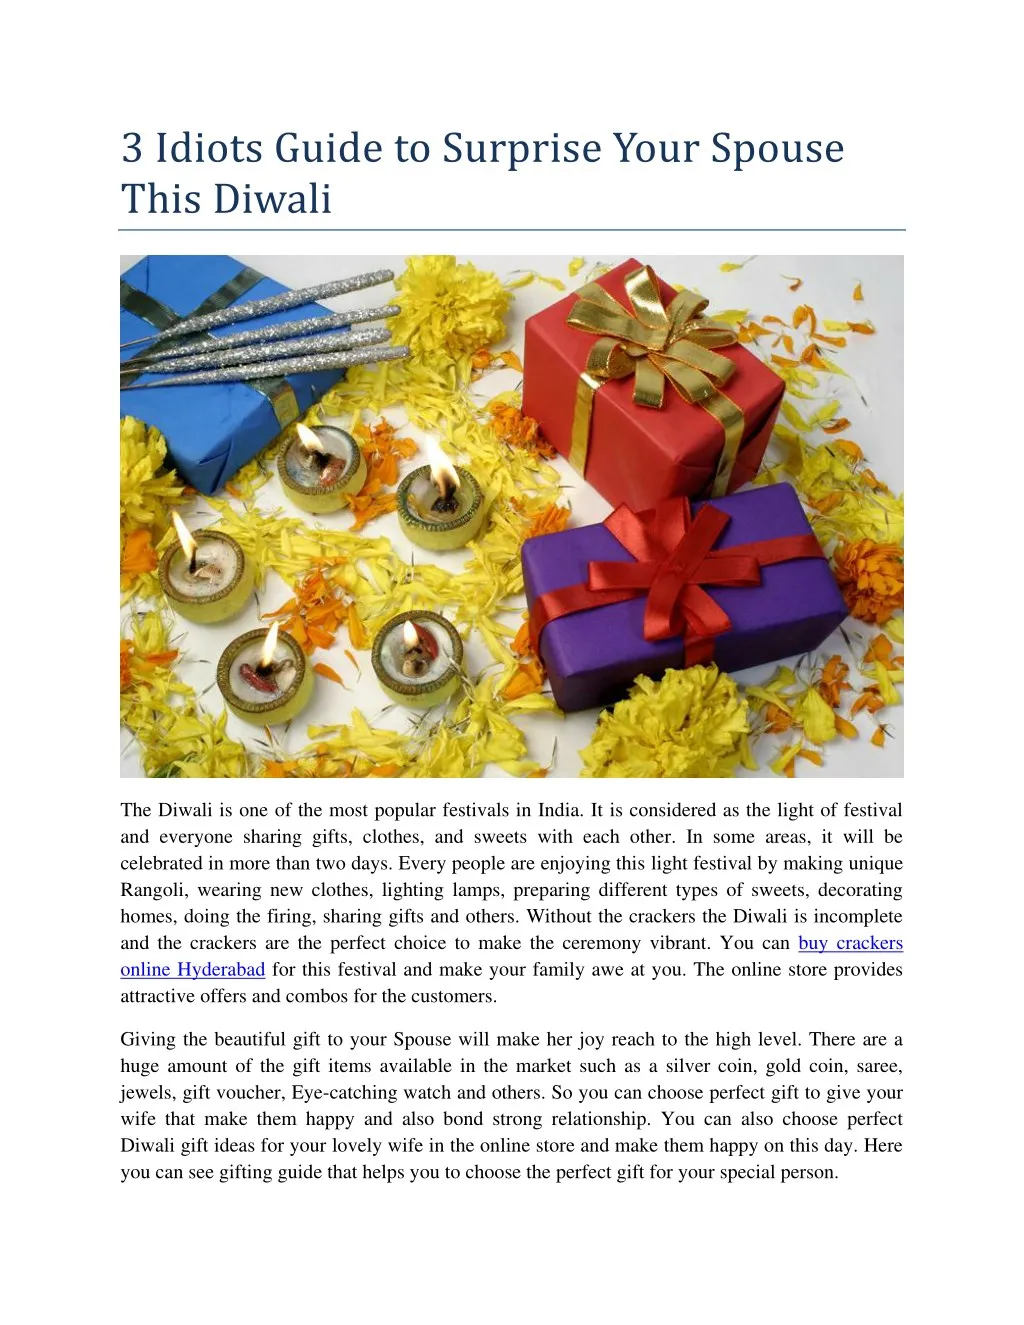 3 idiots guide to surprise your spouse this diwali